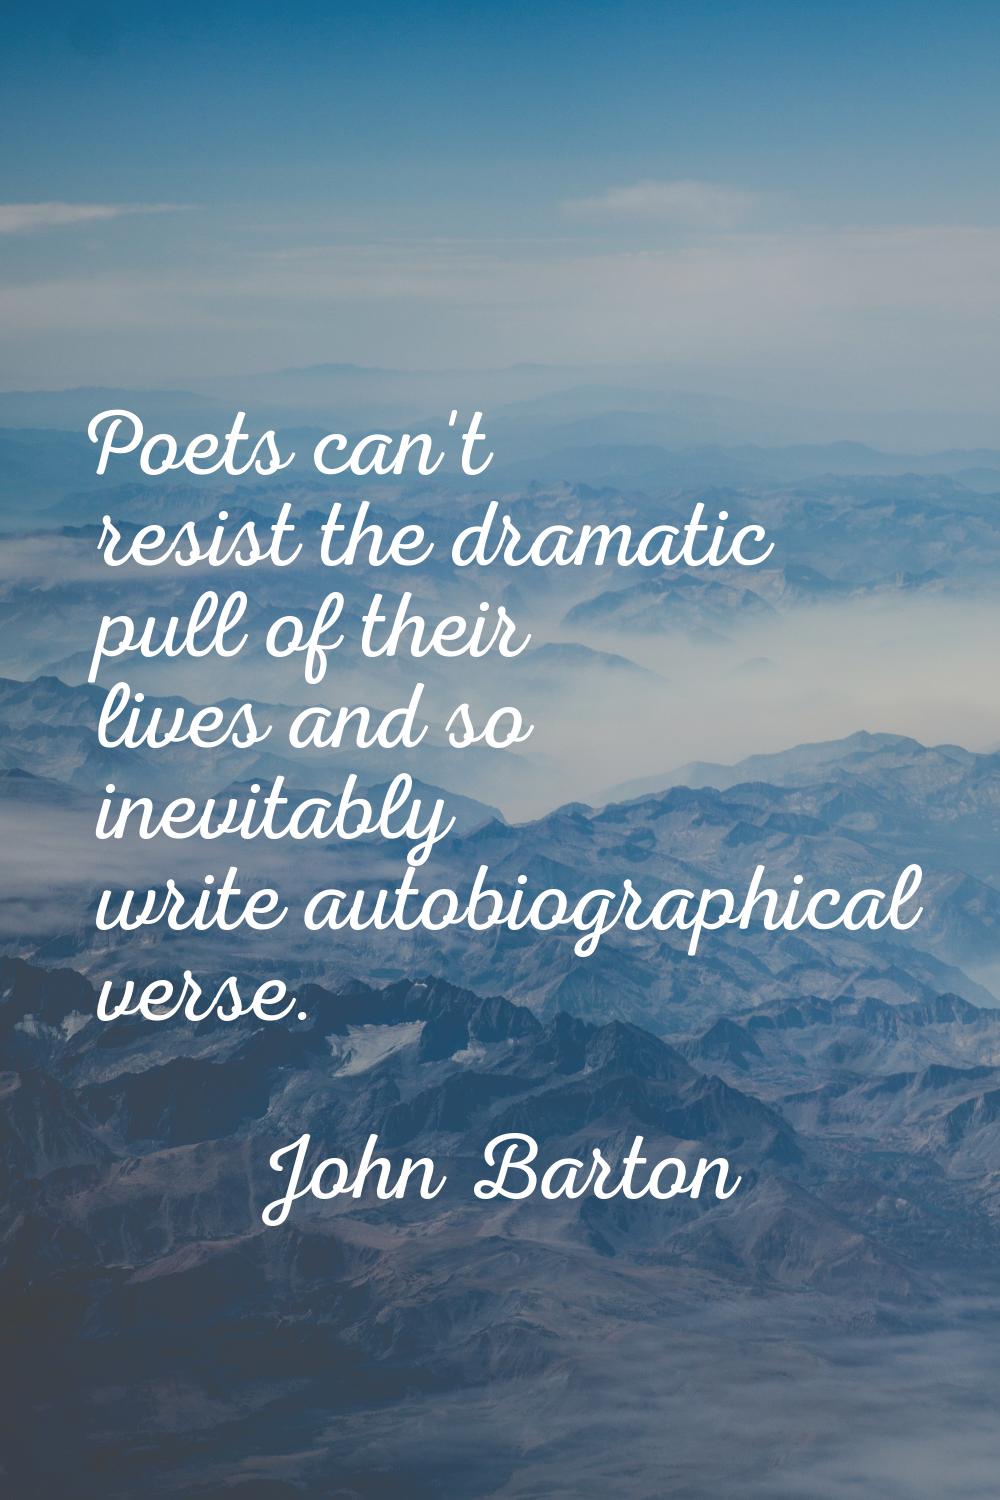 Poets can't resist the dramatic pull of their lives and so inevitably write autobiographical verse.